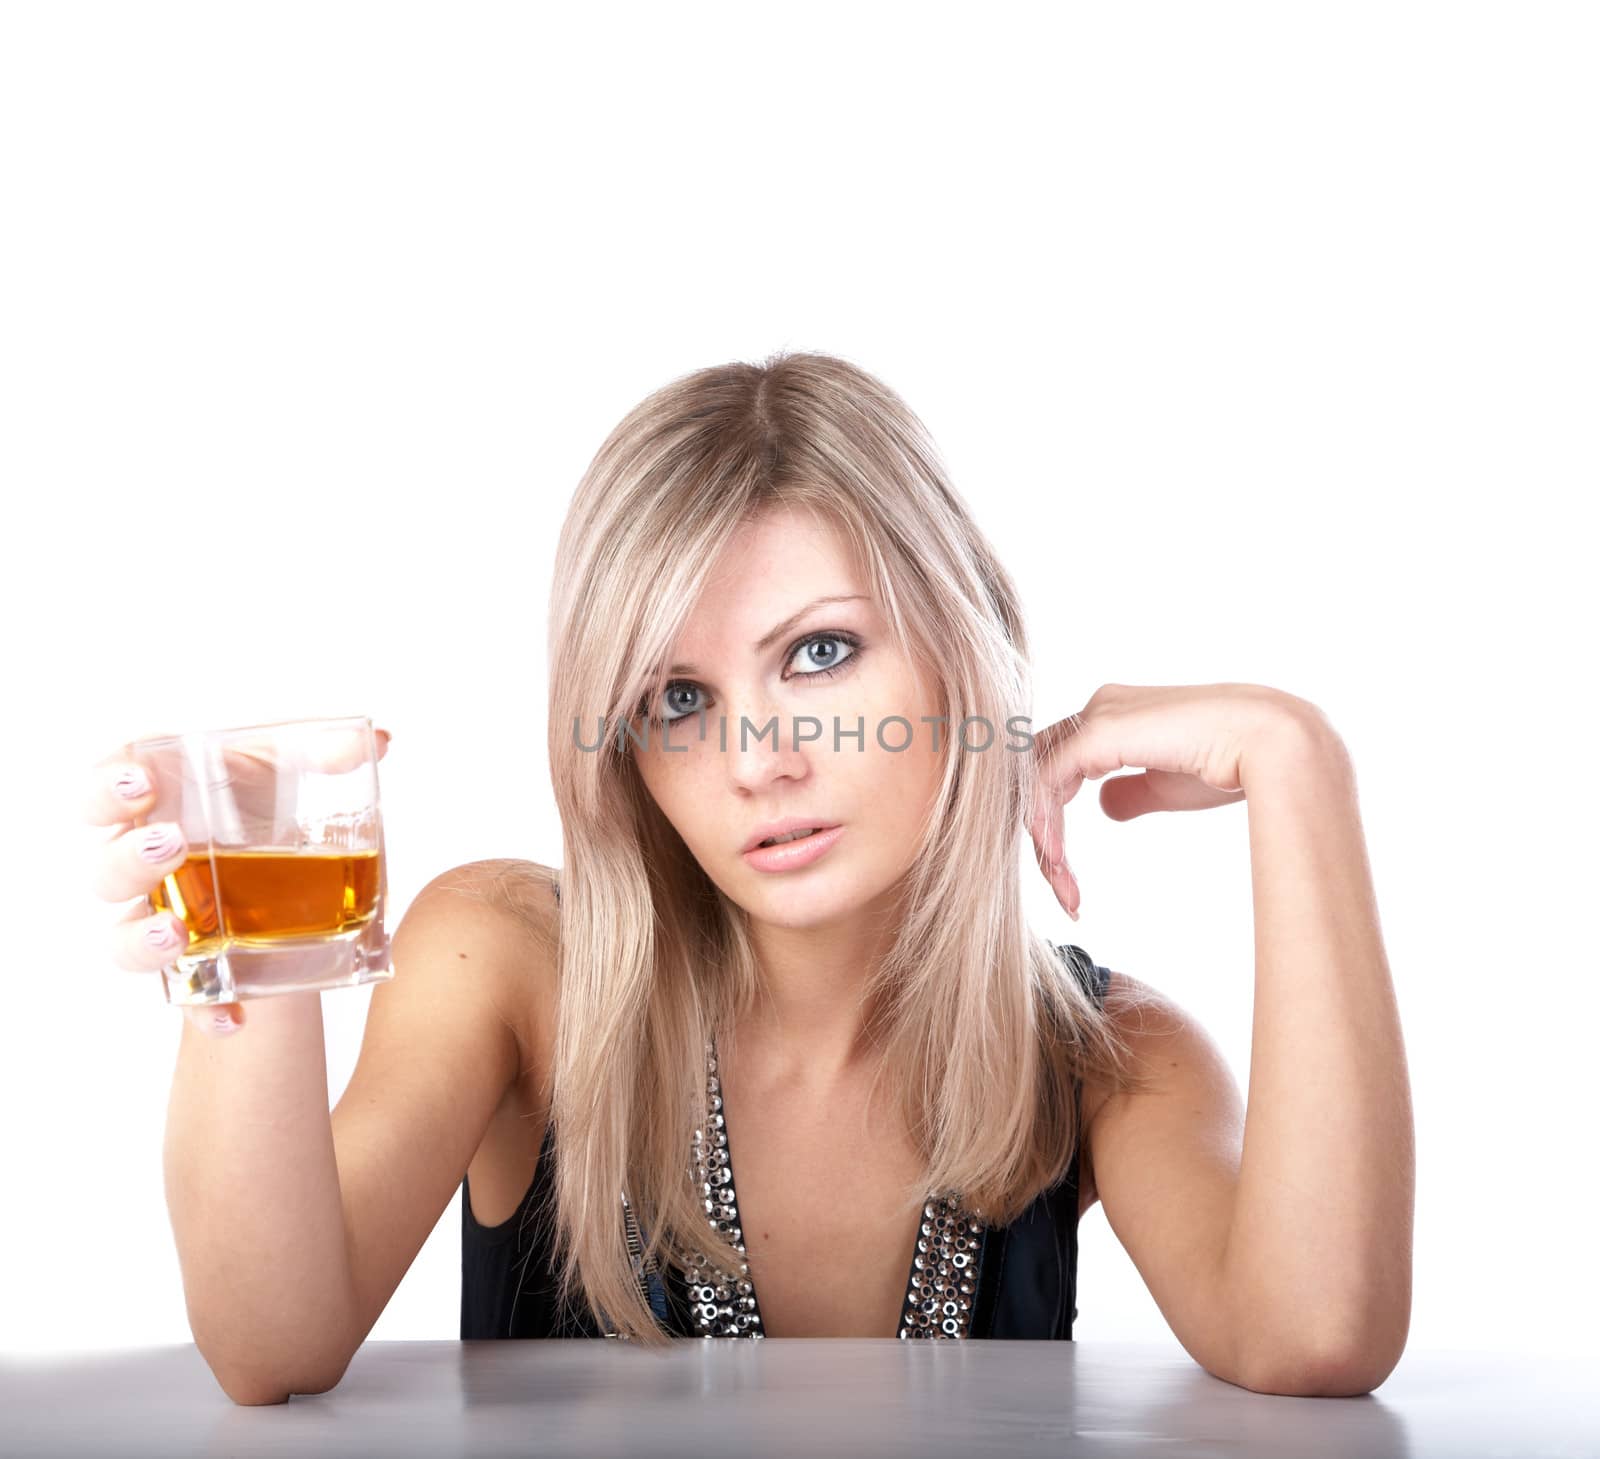 The girl with  glass of whisky on a white background